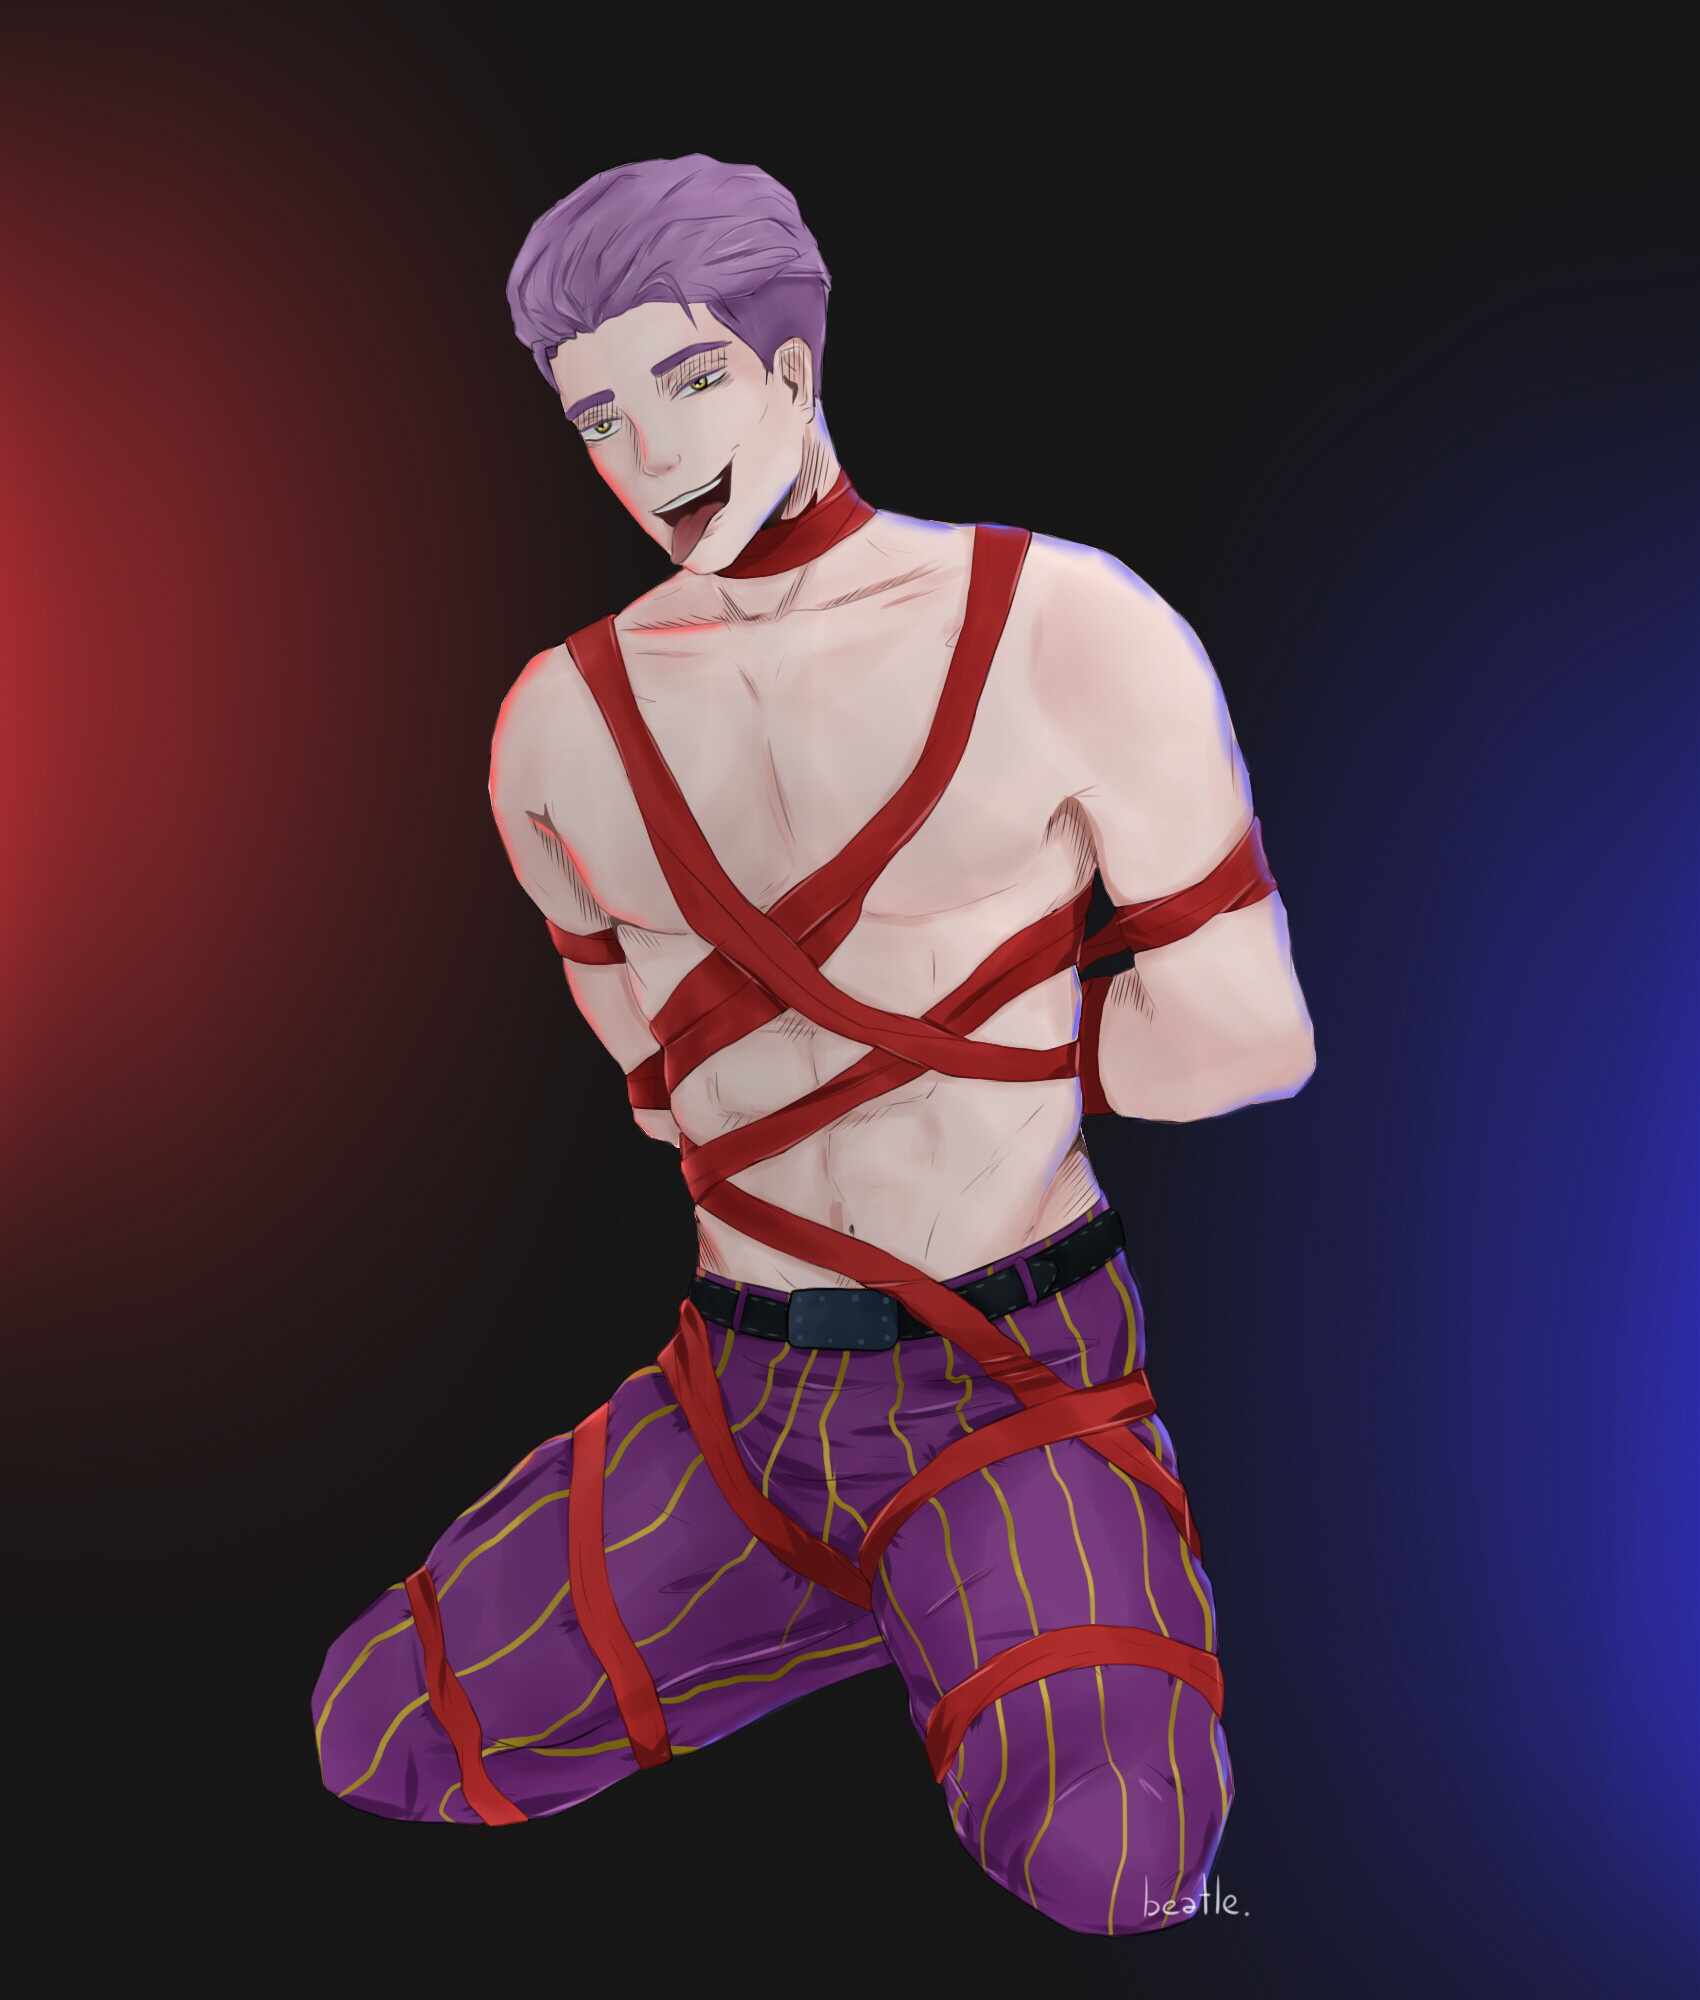 the trickster dead by daylight